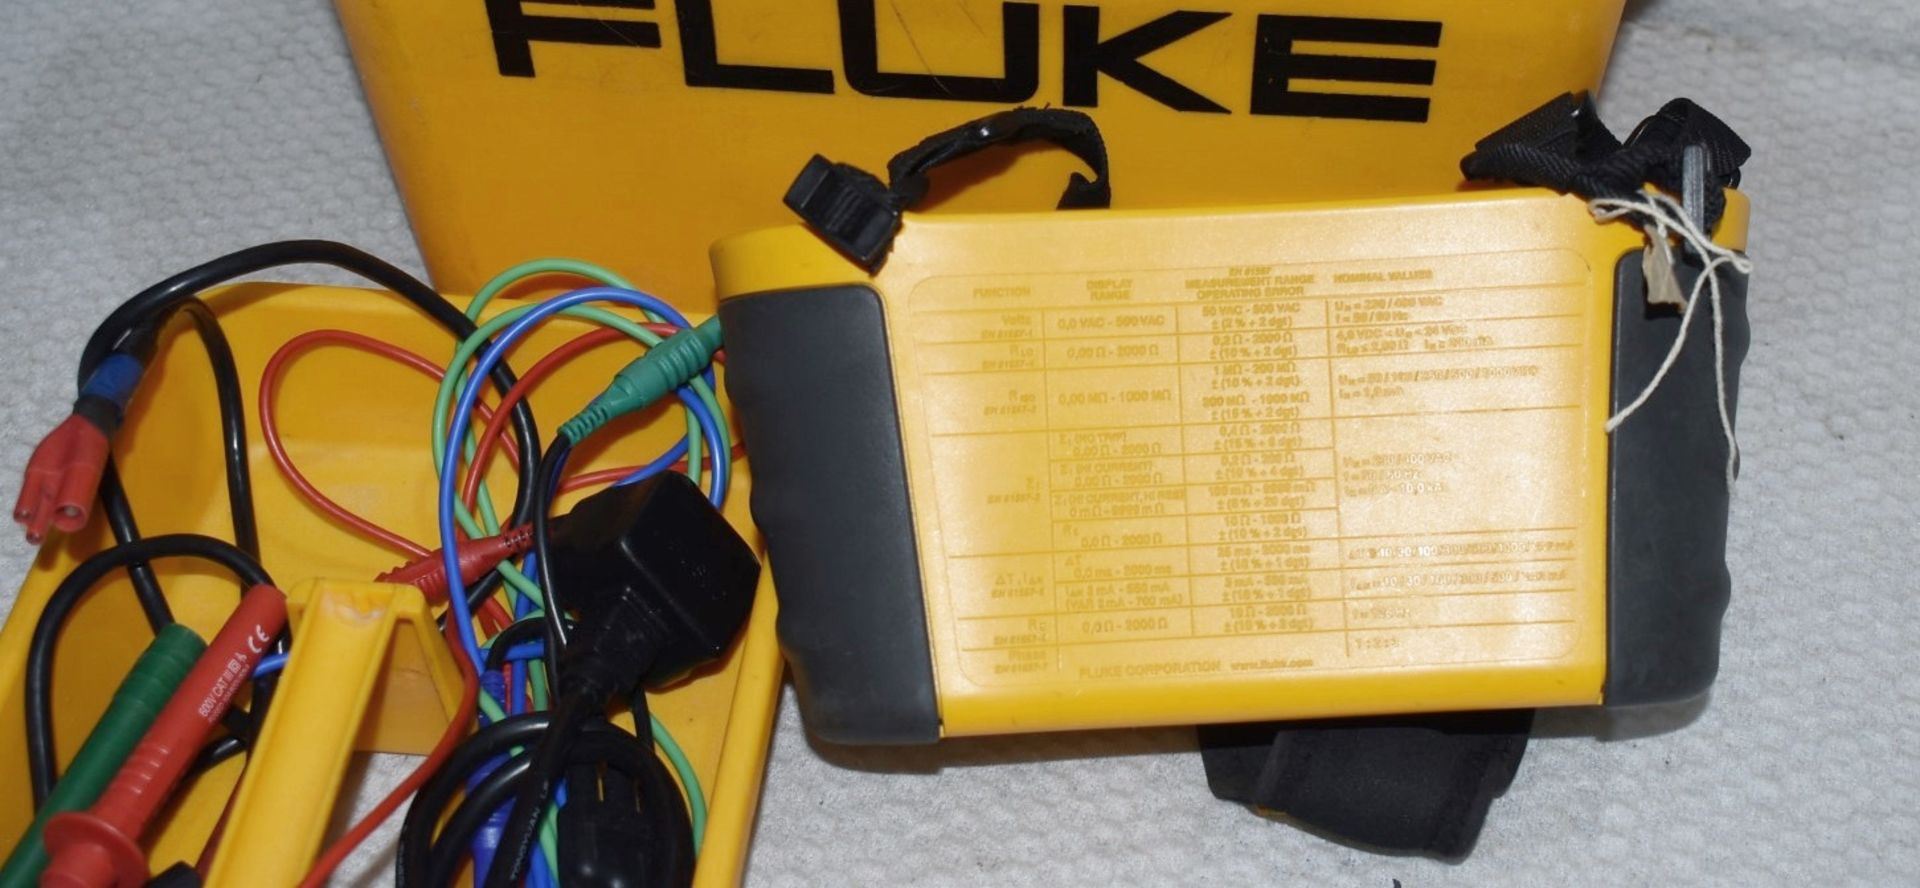 1 x FLUKE 1653B Multifunction Electrical installation Safety Tester With Portable Hard Carry - Image 3 of 3